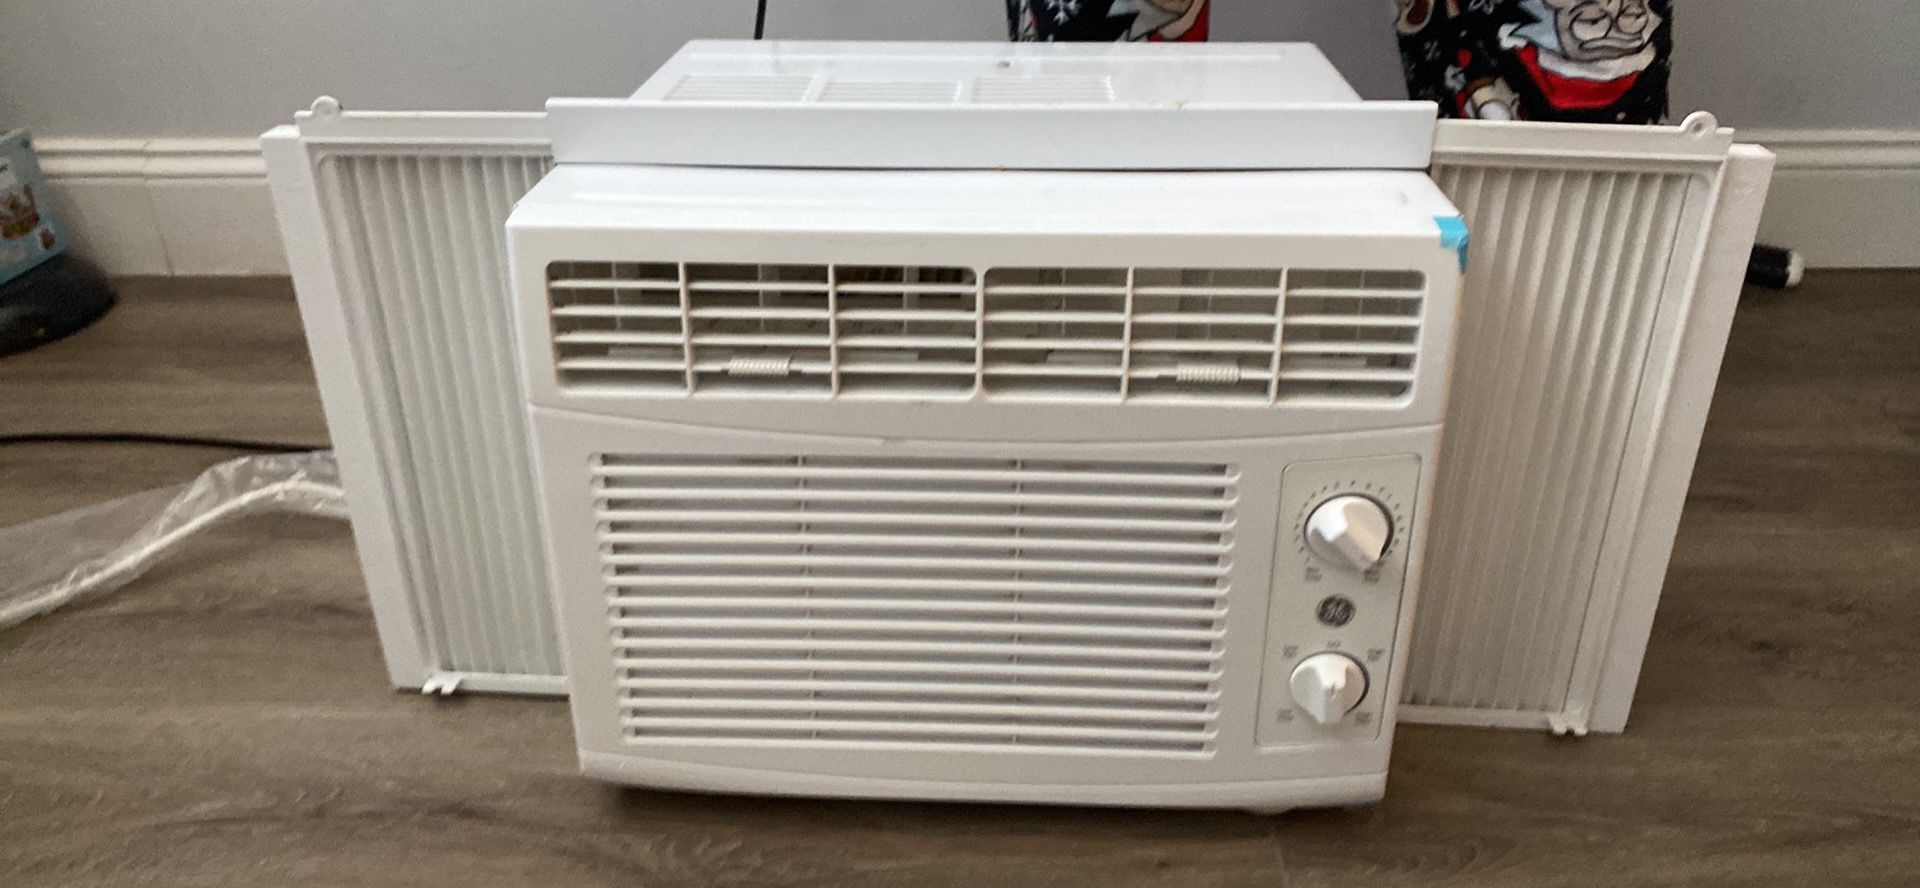 GE Window Air Conditioner 5000 BTU, Efficient Cooling for Small Area Like Bedrooms And Guest Rooms 